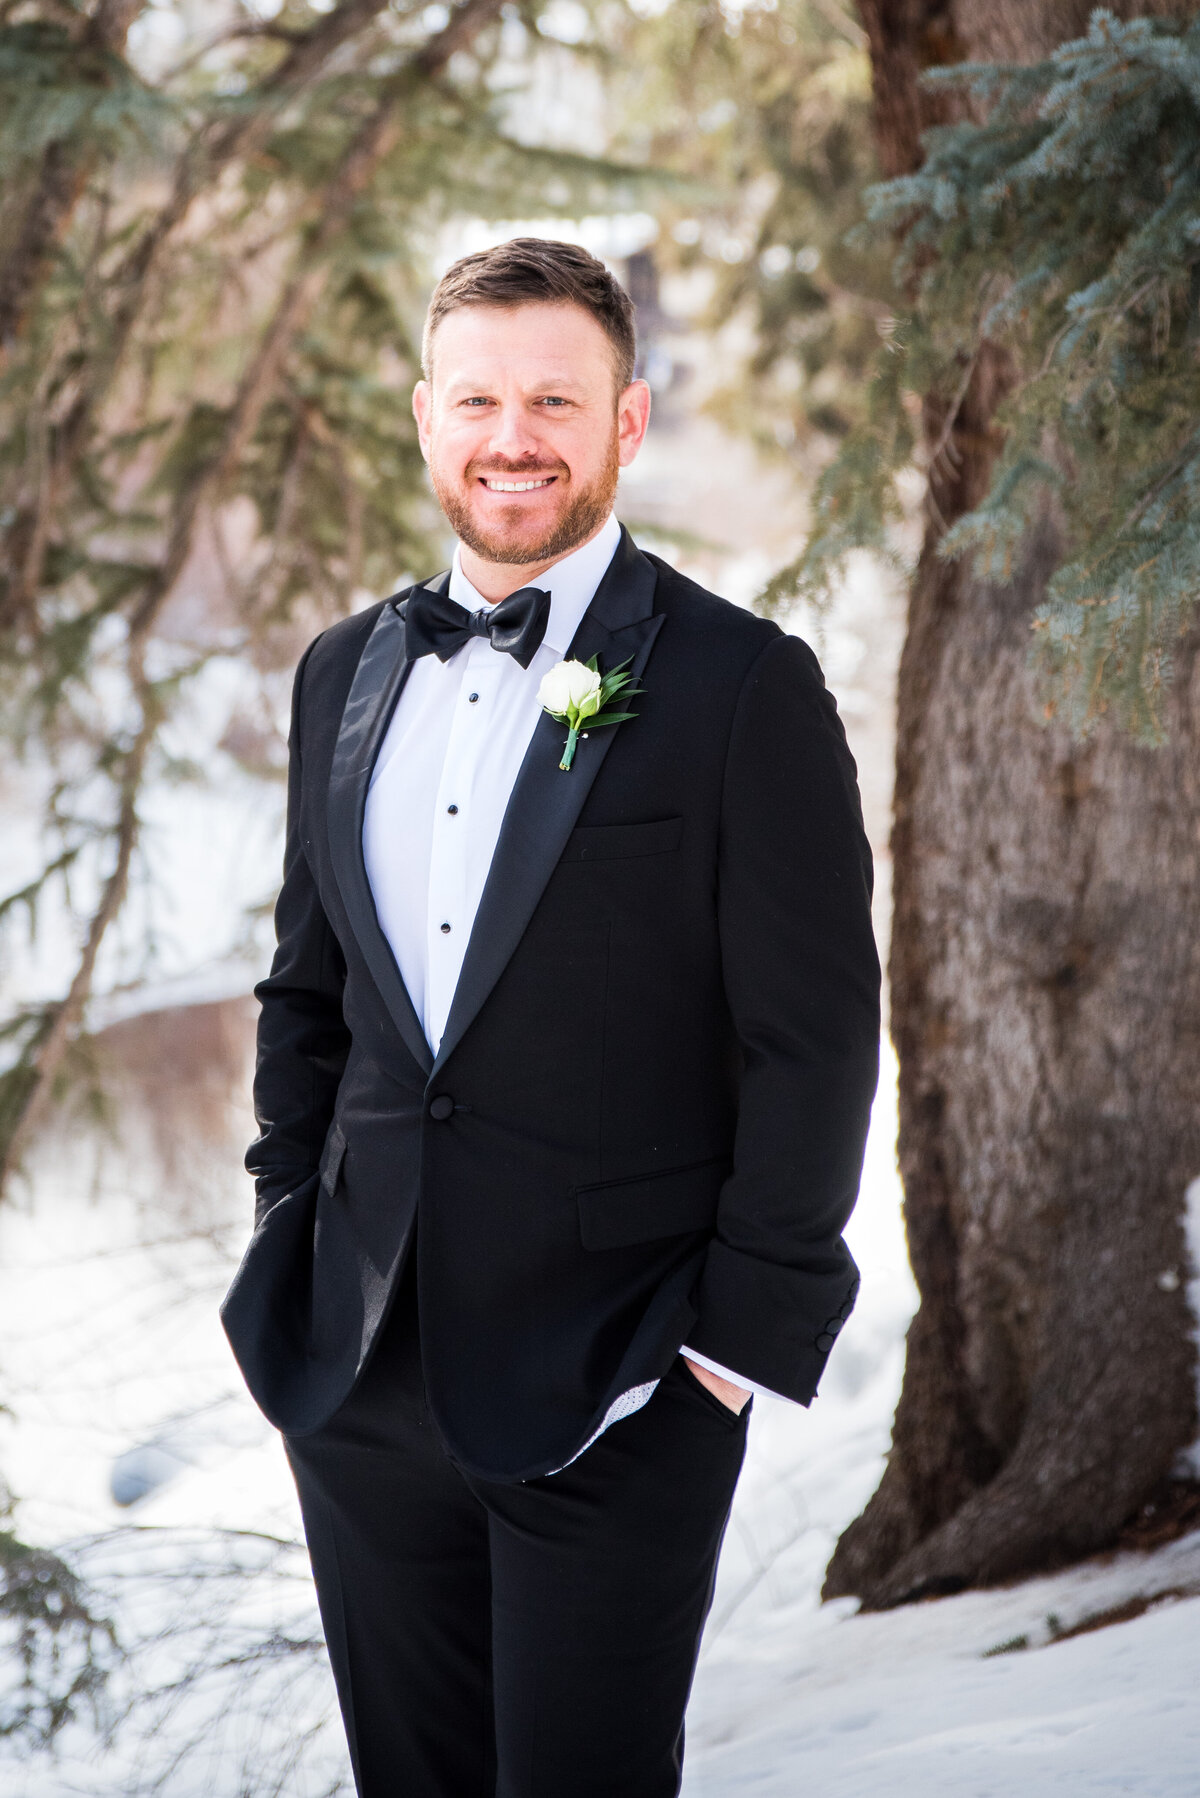 A groom smiles at the camera with his hands in his pockets in a snowy setting in Vail, Colorado.